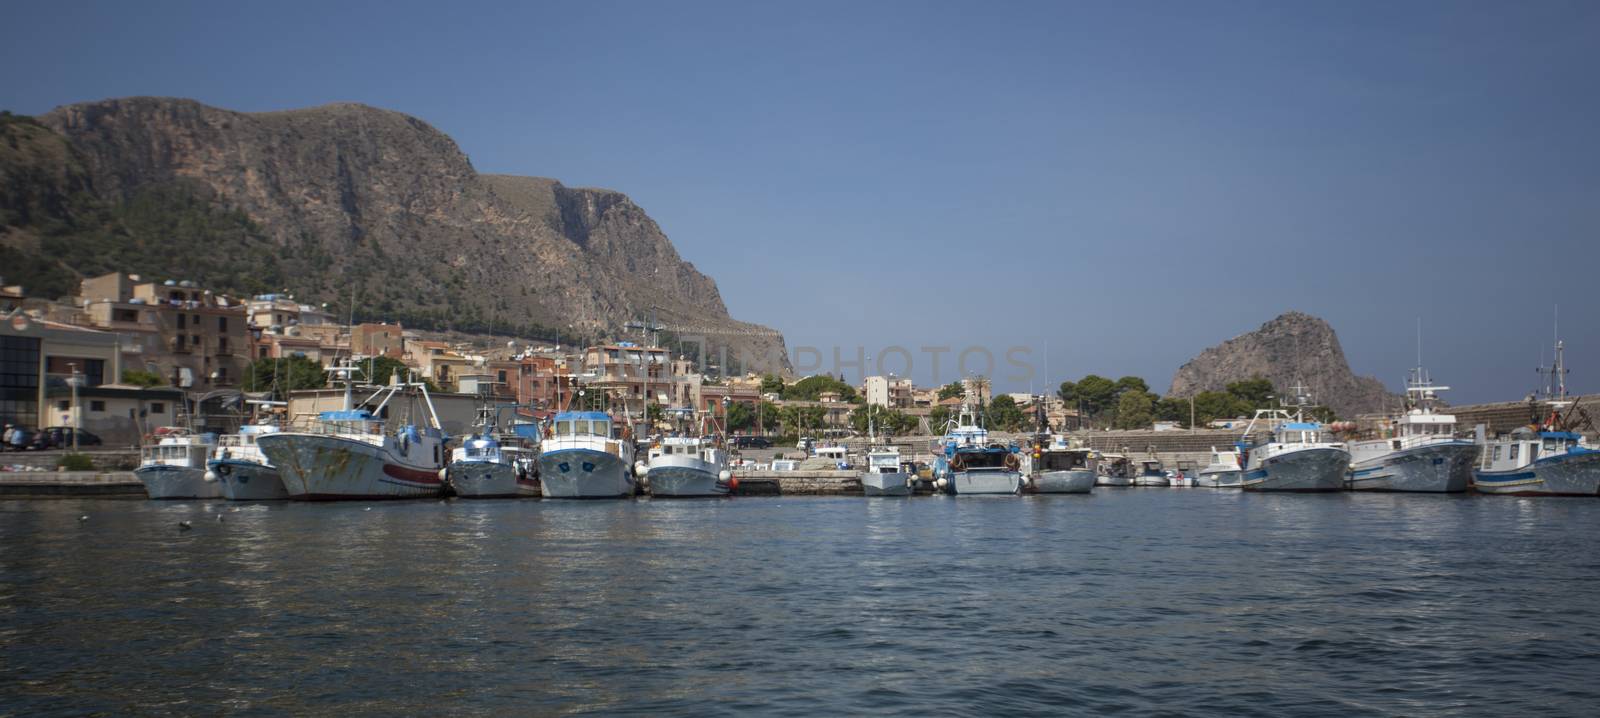 View of the port of Bagnera in the locality of Porticello near Palermo in Sicily